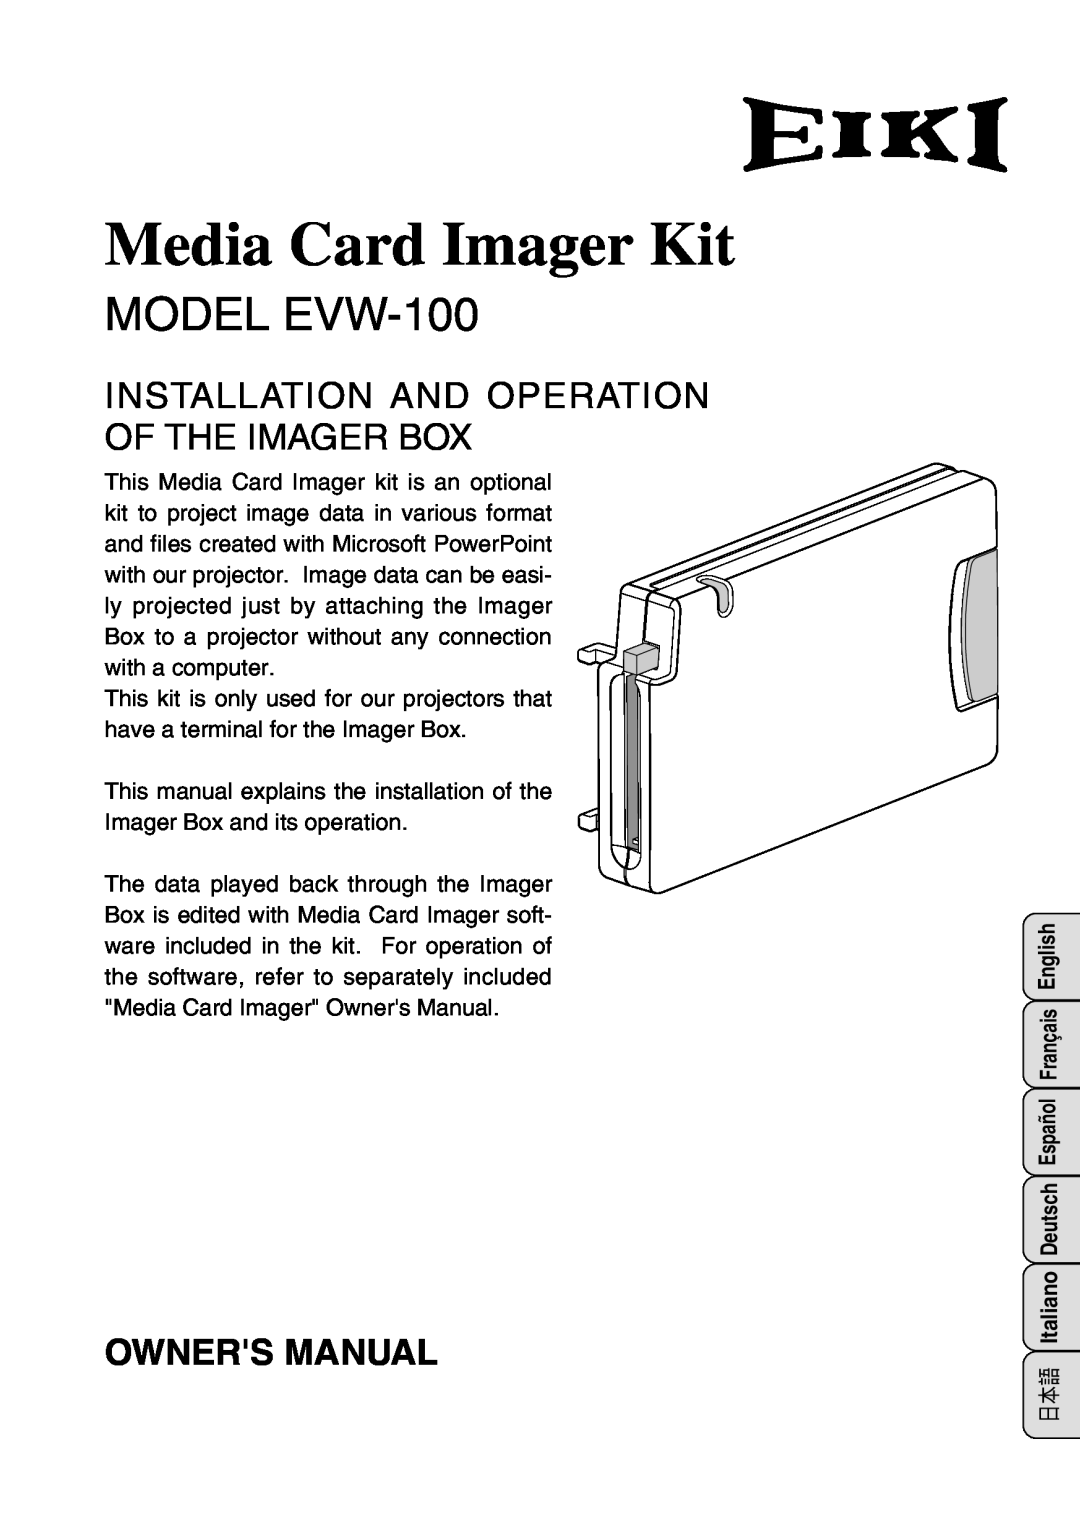 Eiki owner manual Installation And Operation Of The Imager Box, Media Card Imager Kit, MODEL EVW-100 